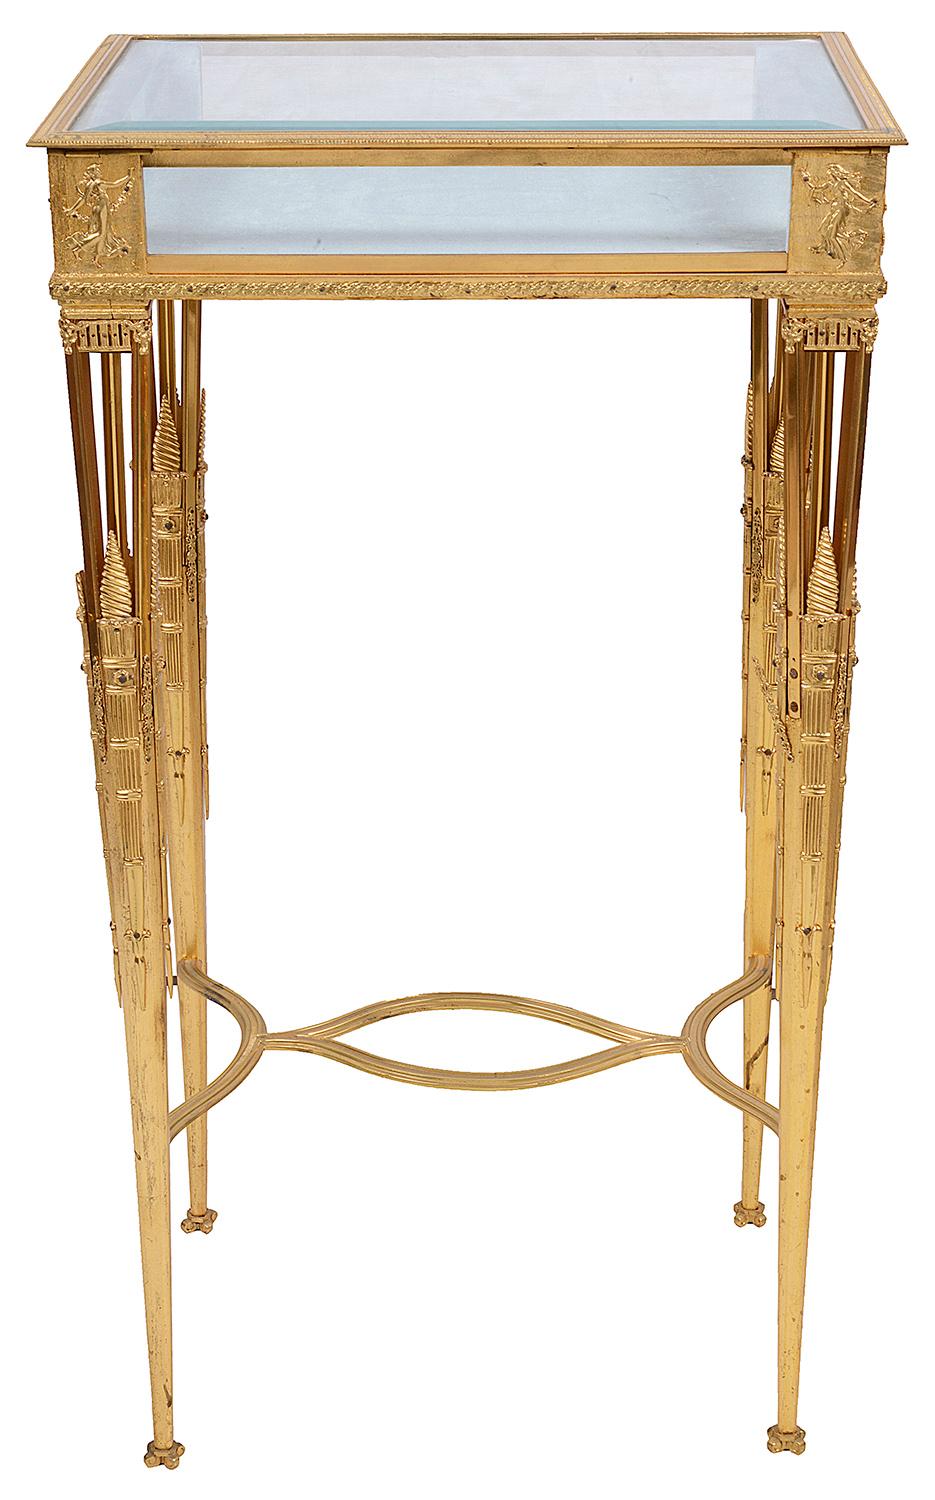 A very good quality late 19th century gilded ormolu Empire influenced Bijouterie display table, having a hinged top opening to reveal a silk lined interior. Classical fingers mounted on the corners, pierced and motif decoration, raised on tapering